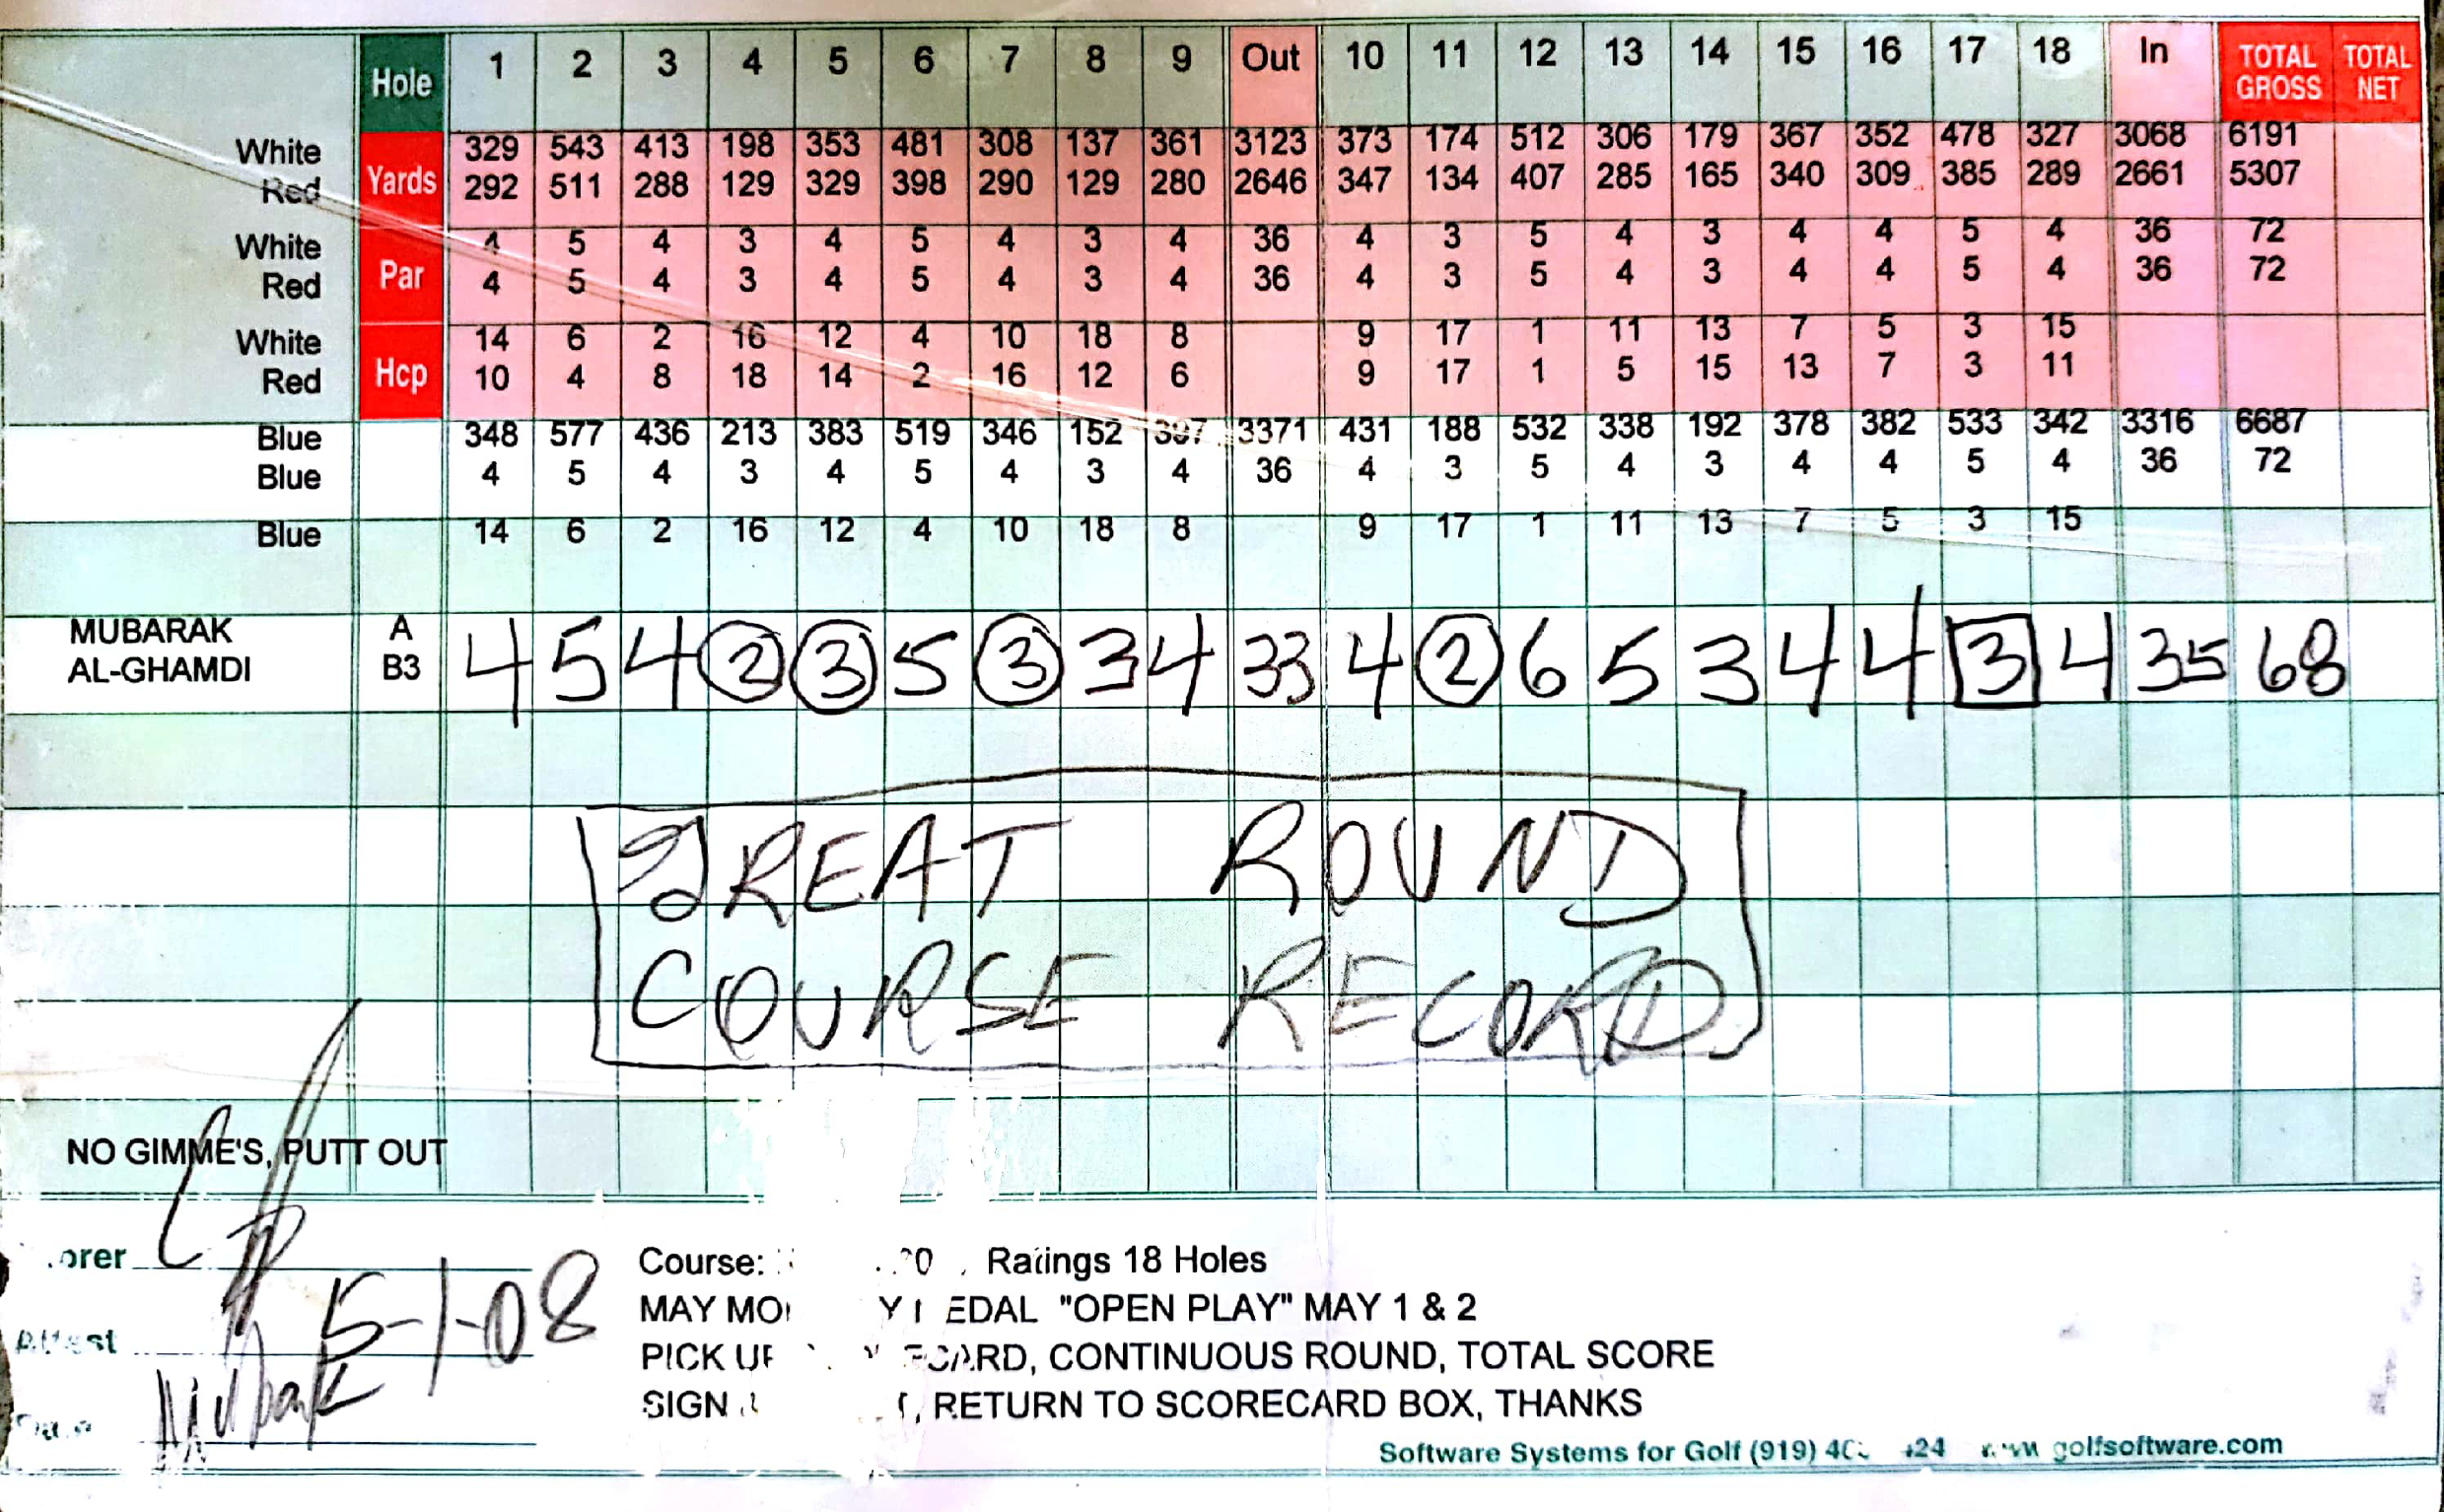 Blue Tees Course Record